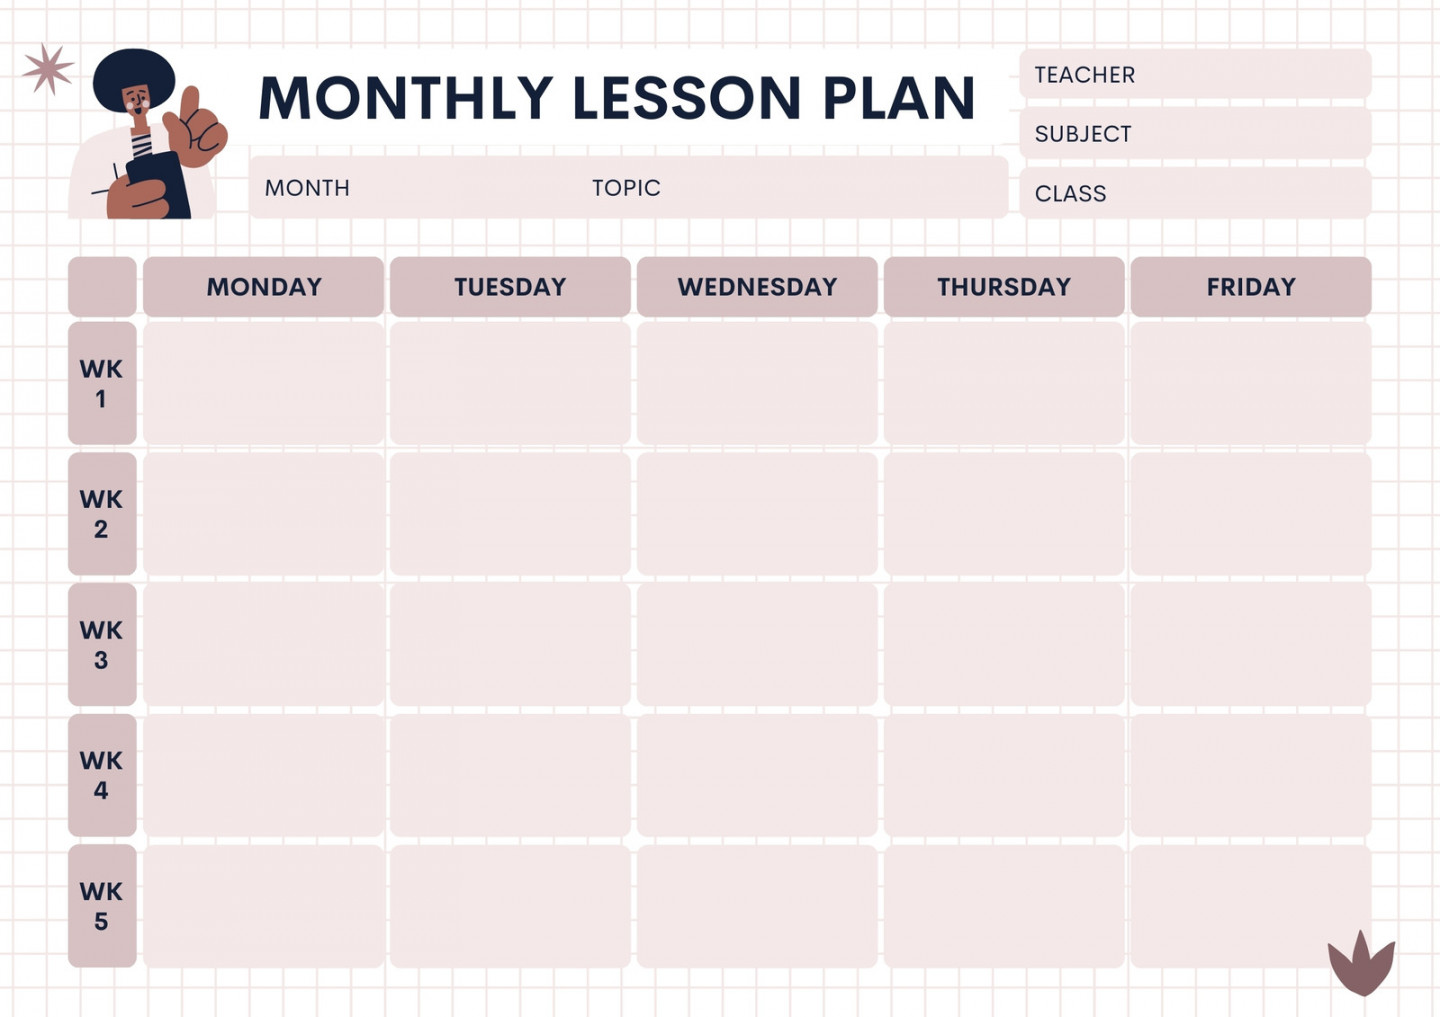 Page  - Free, printable, customizable weekly lesson plan